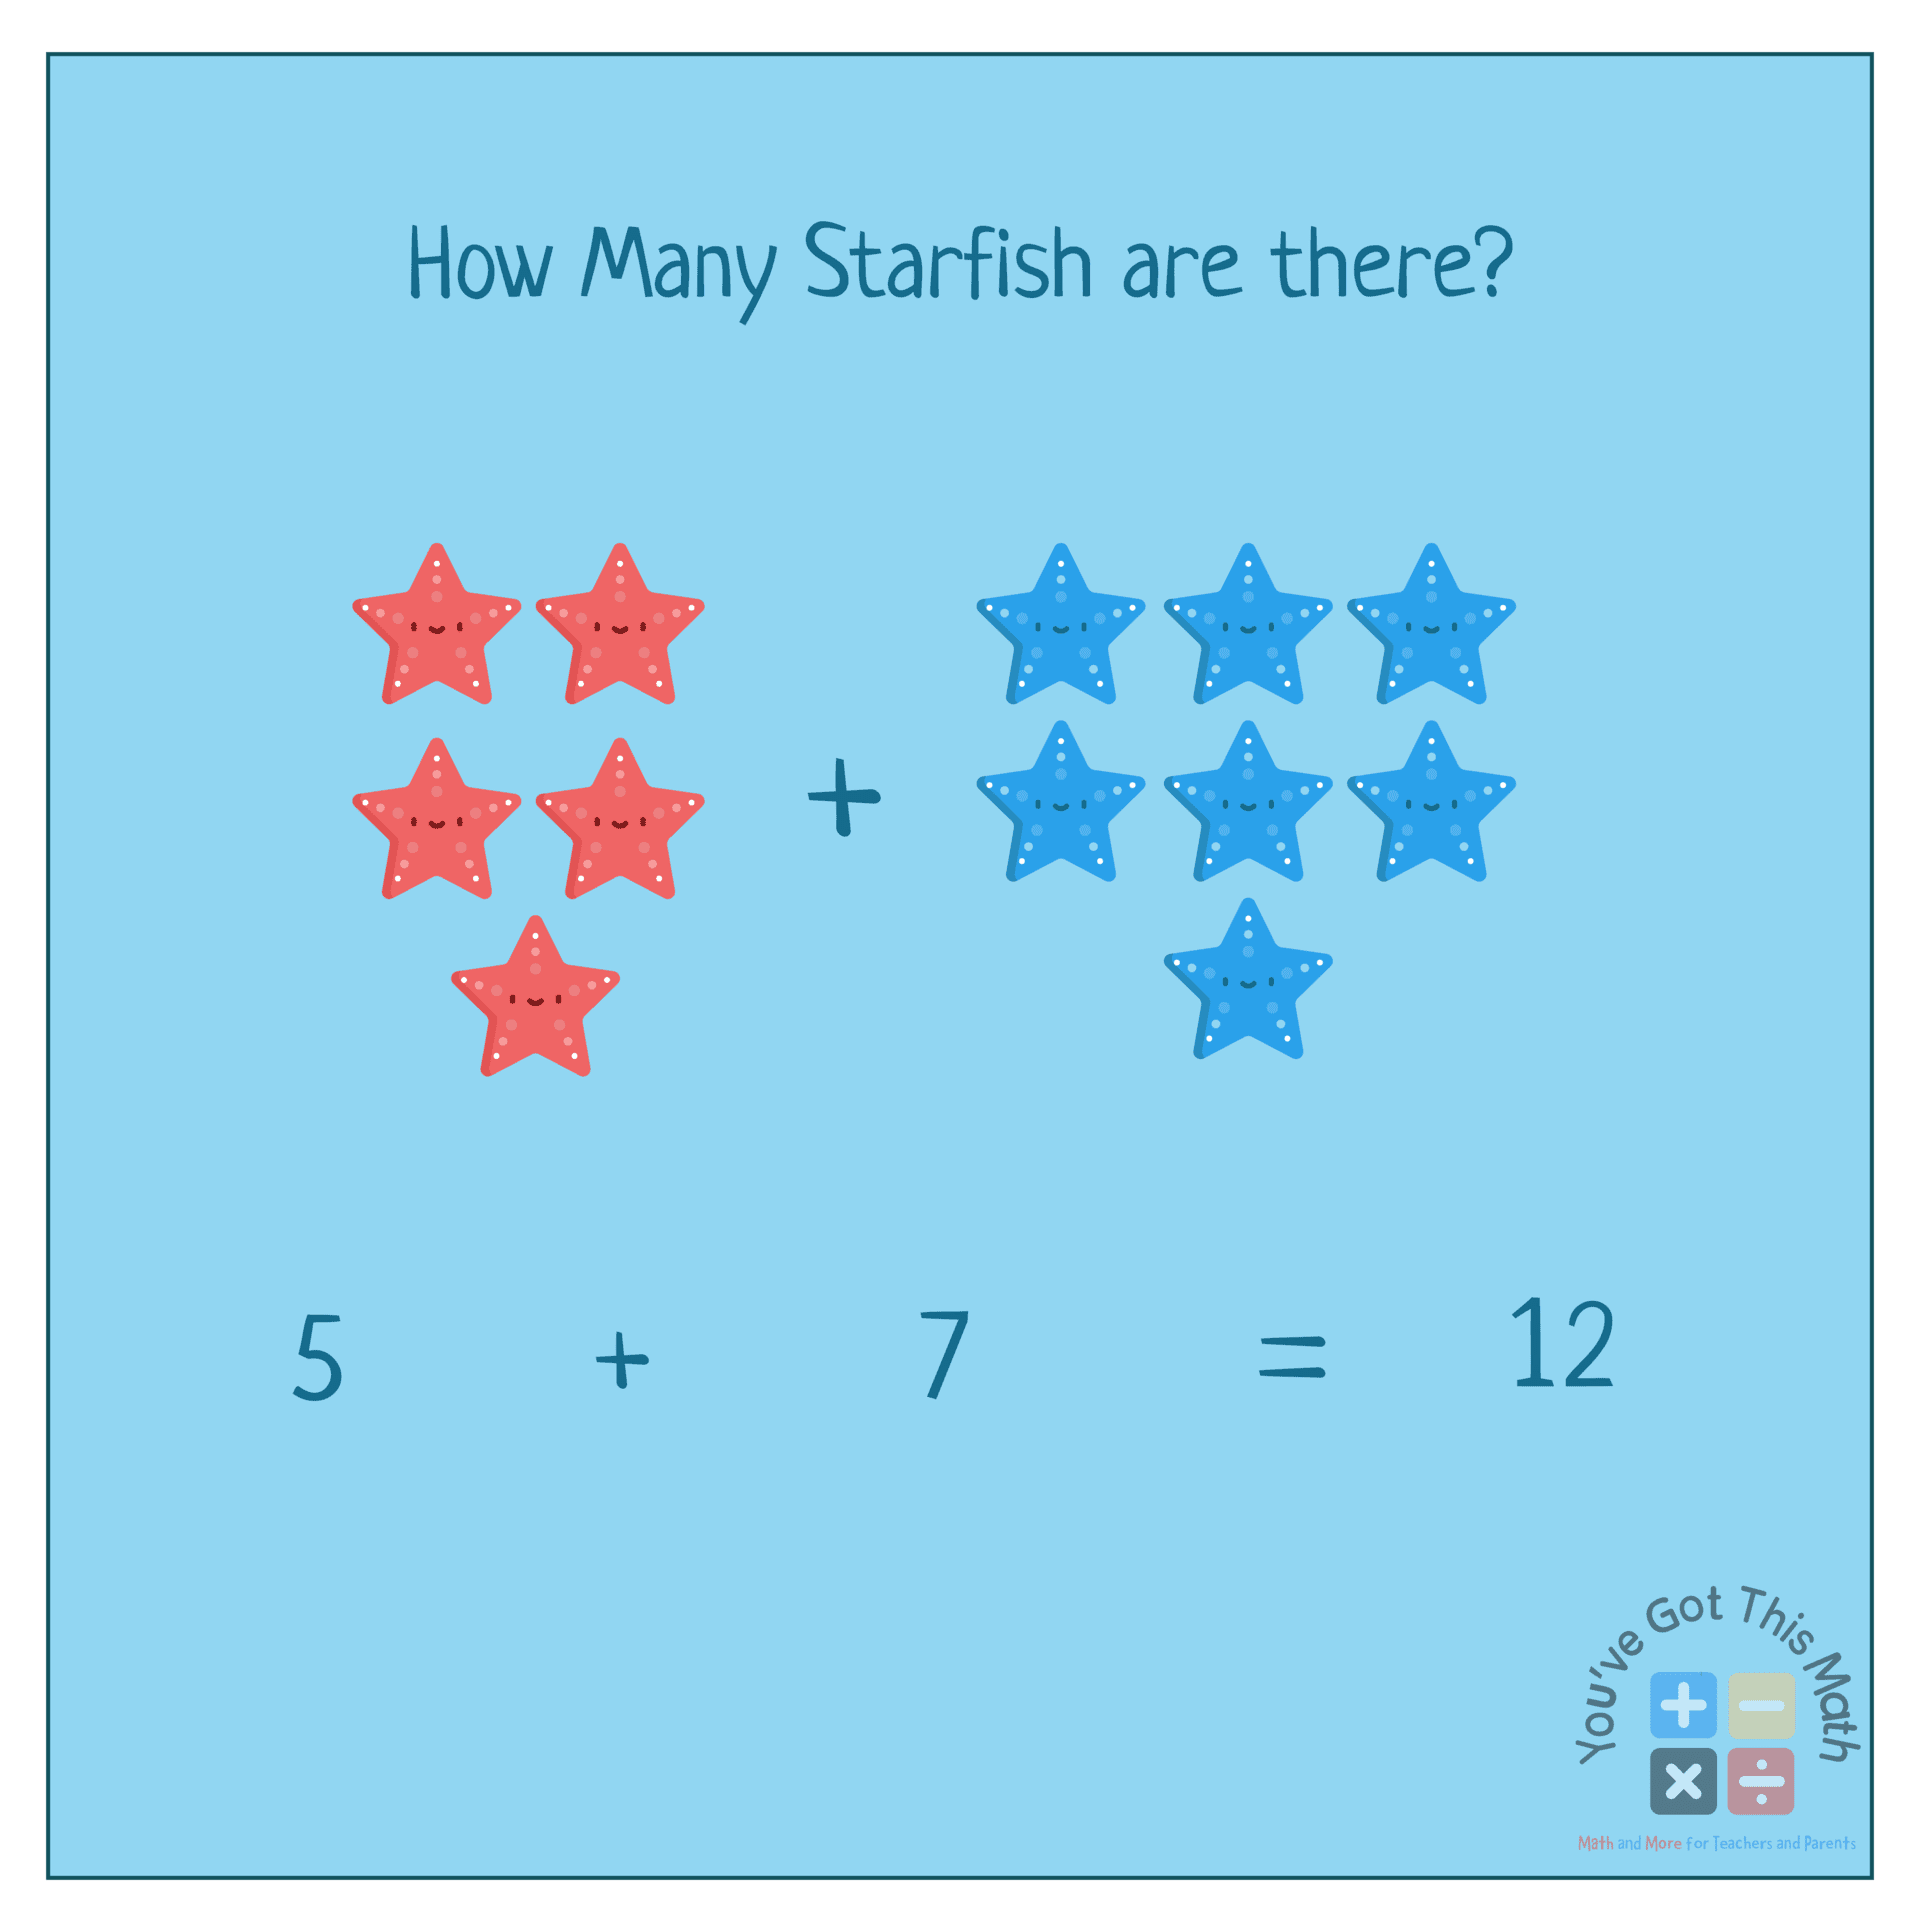 Counting starfish by addition